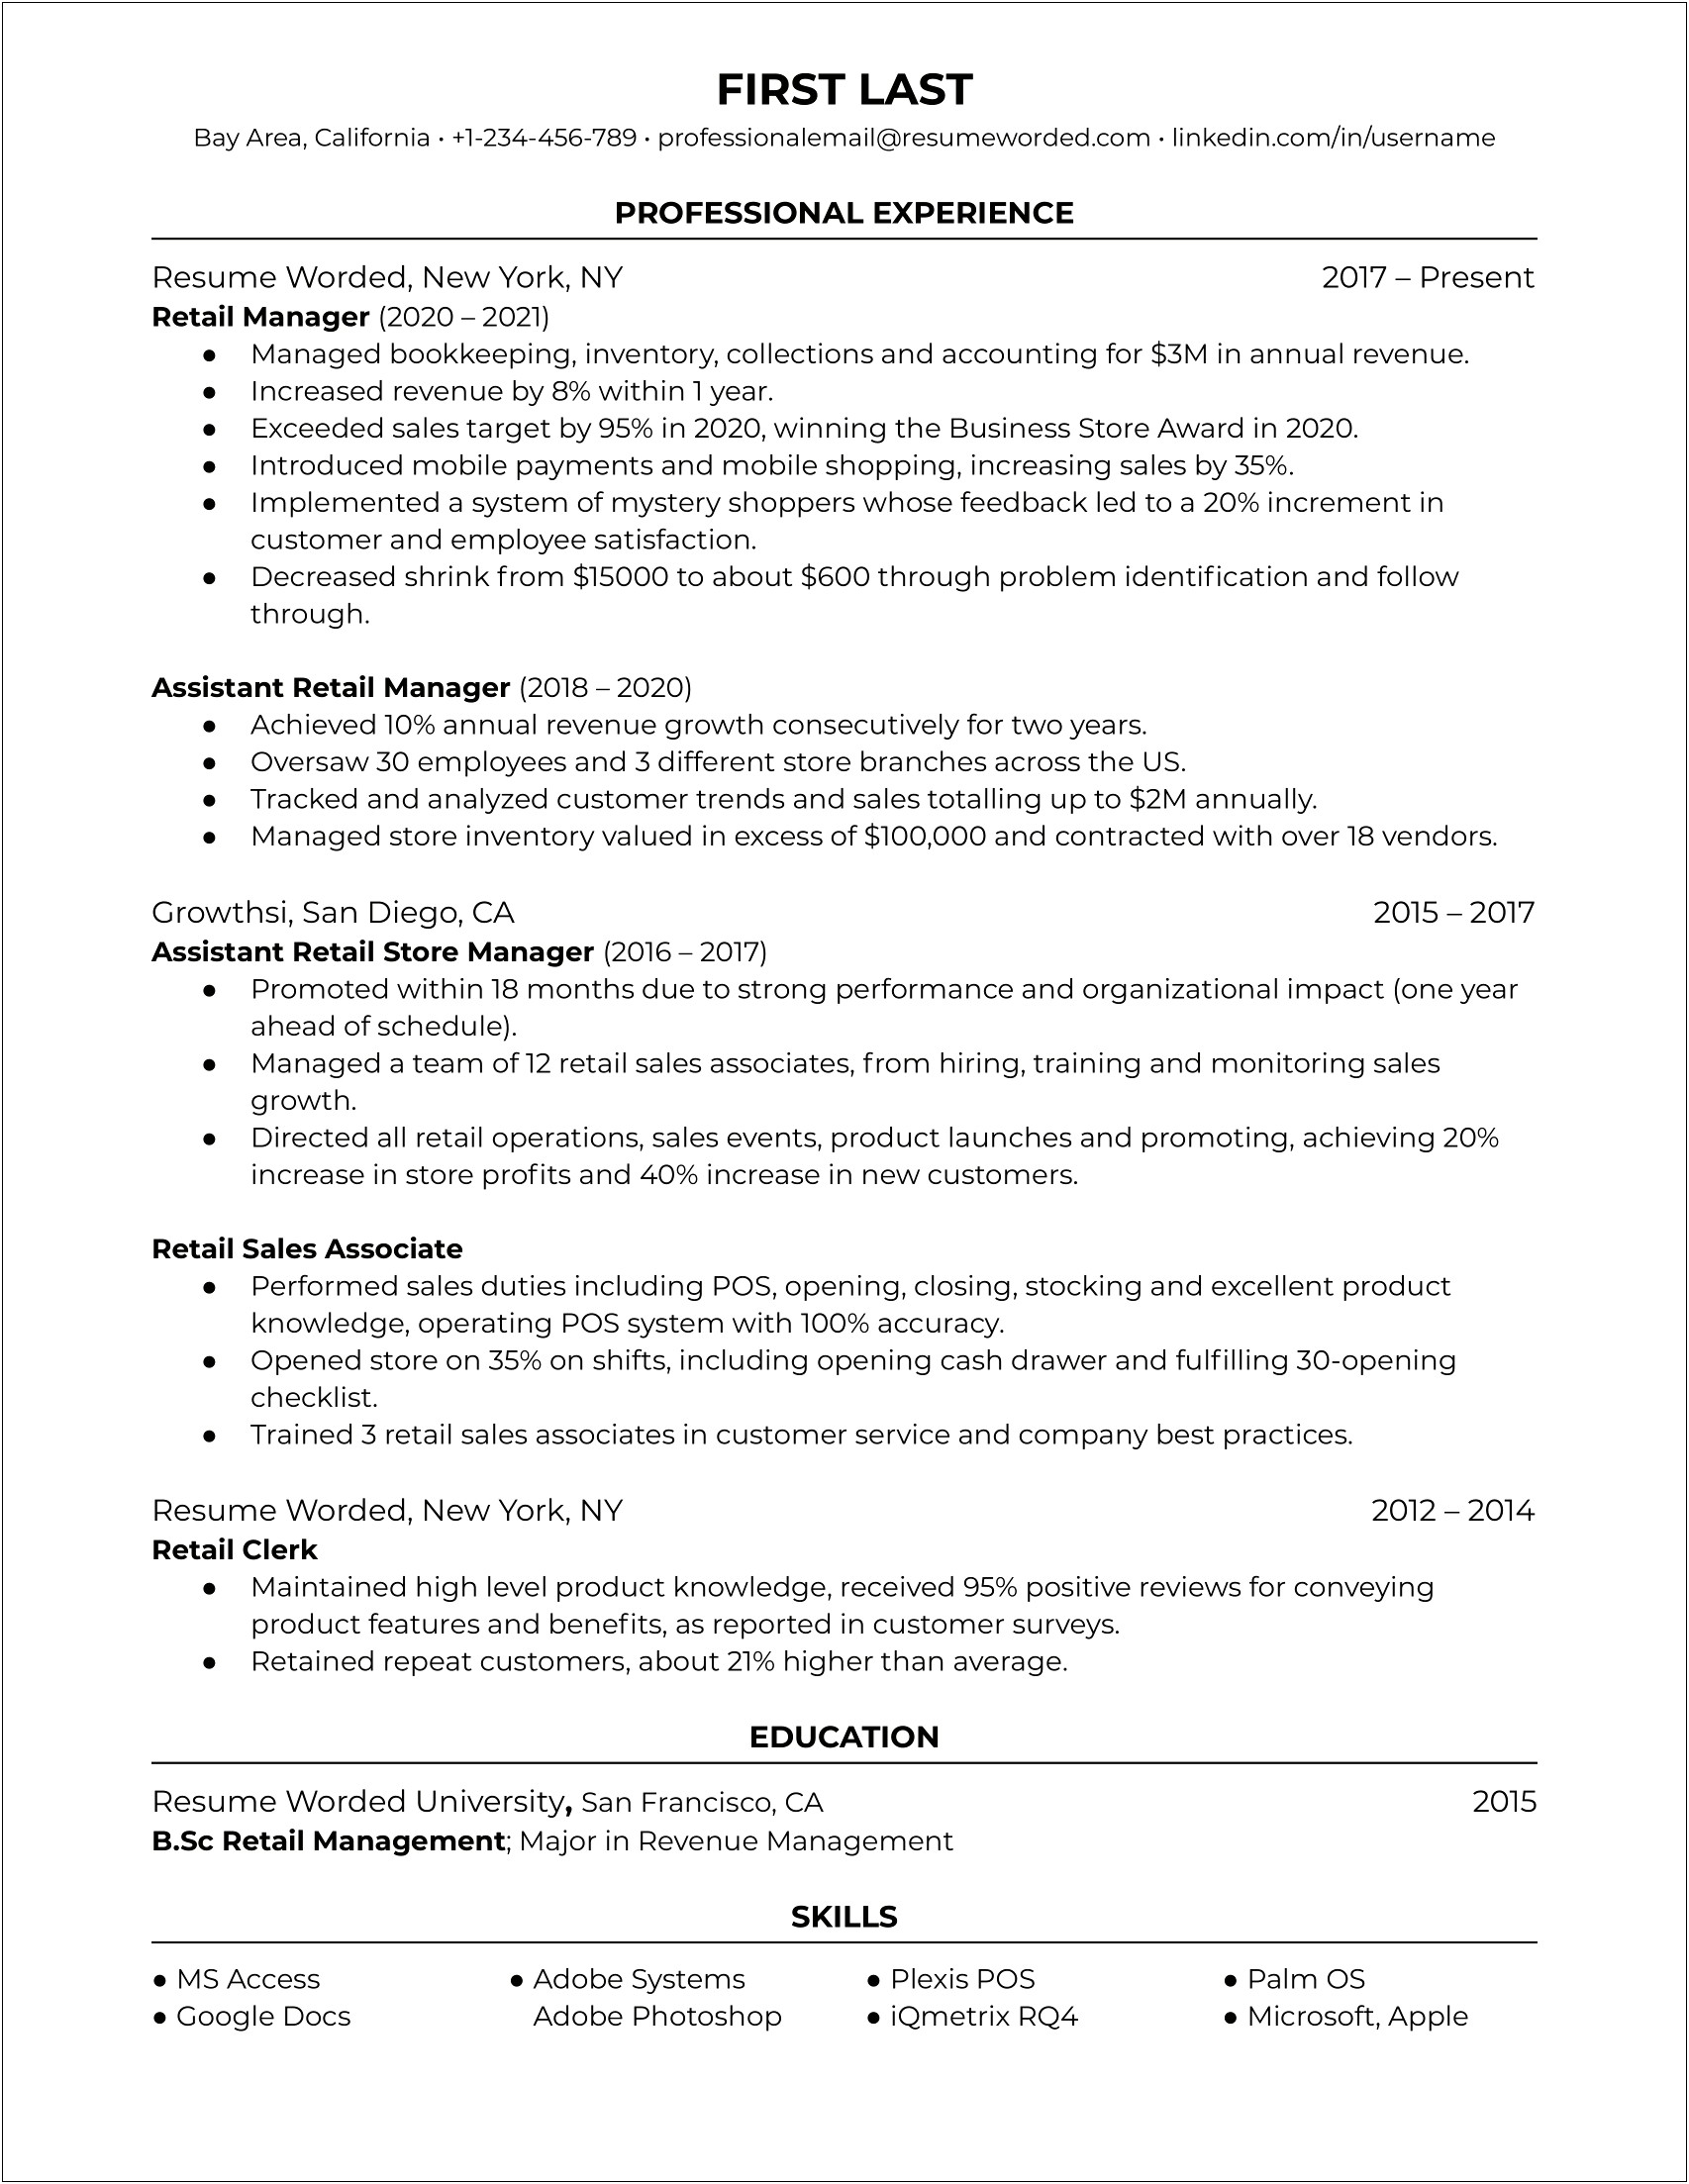 Sample Resume For Retail Sales Jobs